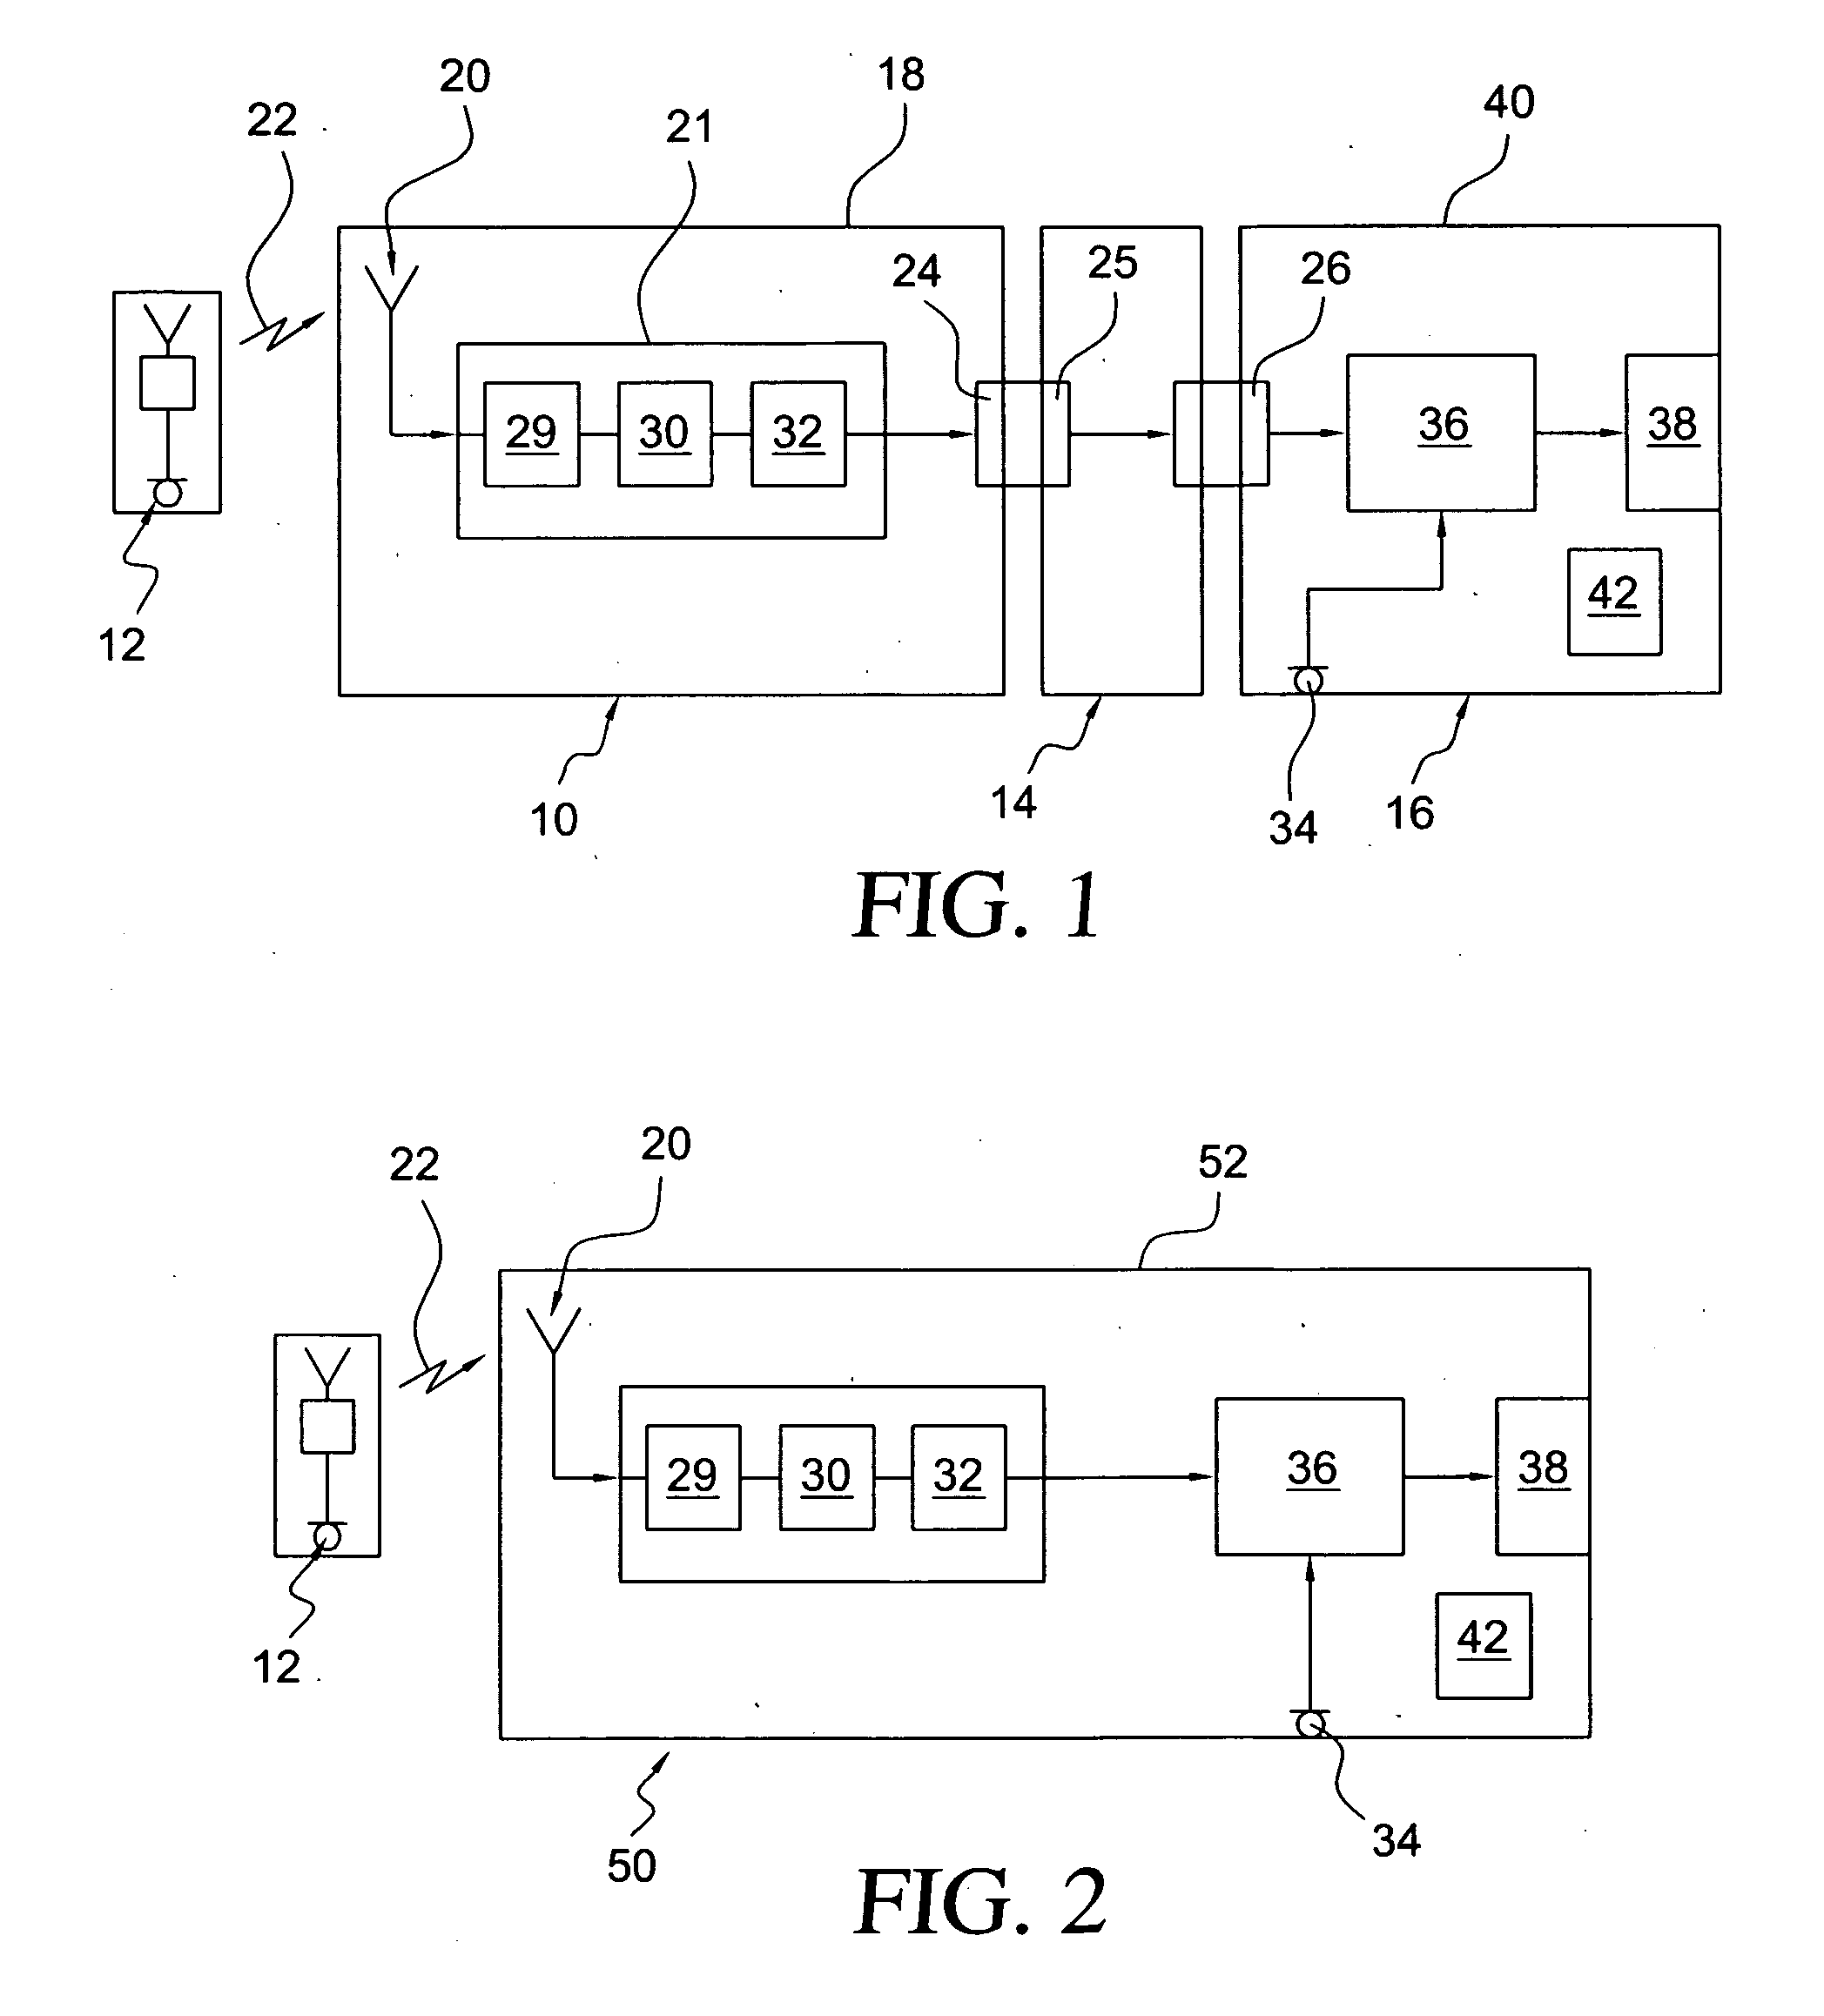 Wireless audio signal receiver device for a hearing instrument